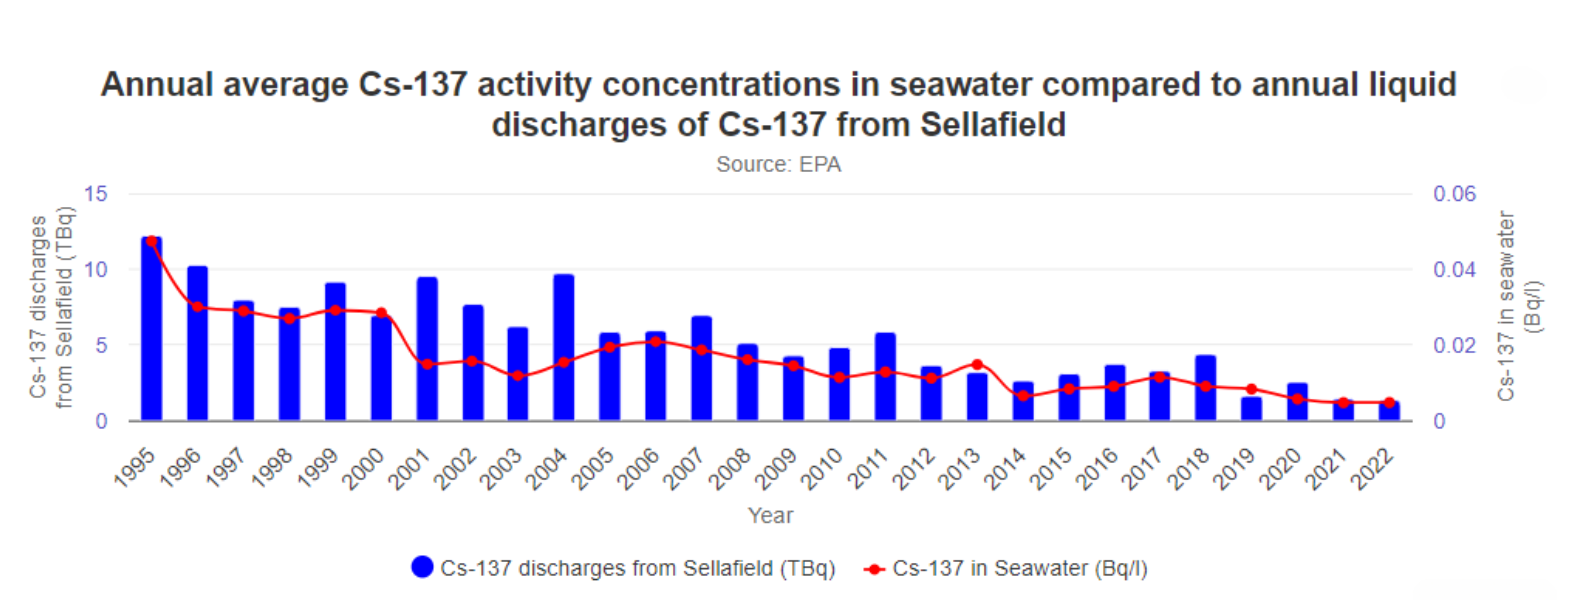 Graphic showing the Cs-137 activity concentration in seawater and discharges from Sellafield